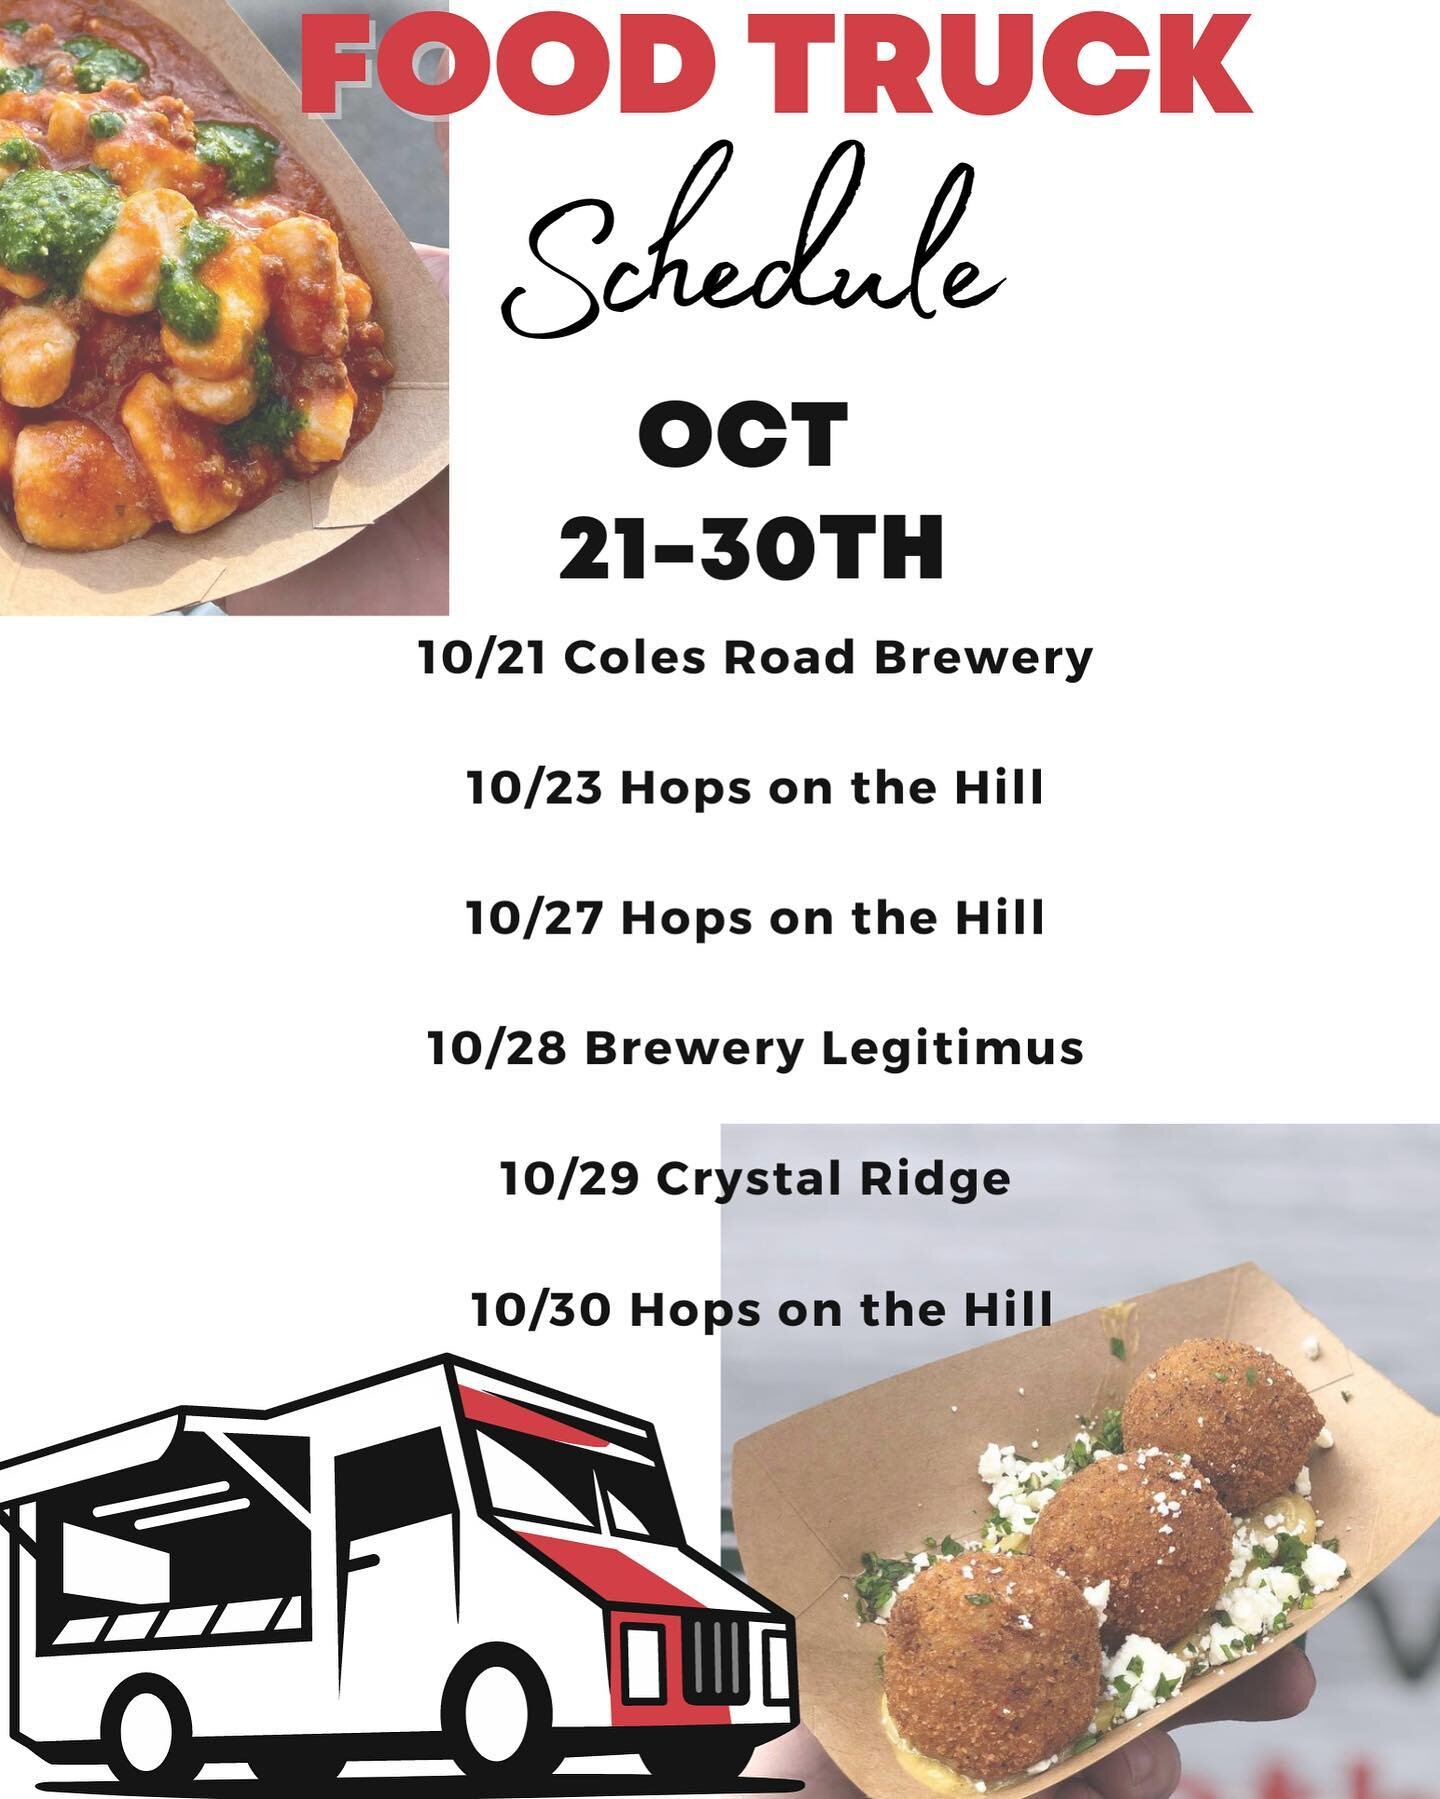 Join us tomorrow @colesroadbrewing and these other great locations all this month! 
&bull;
10/21 Coles Road Brewery 

10/23 Hops on the Hill 

10/27 Hops on the Hill 

10/28 Brewery Legitimus 

10/29 Crystal Ridge 

10/30 Hops on the Hill